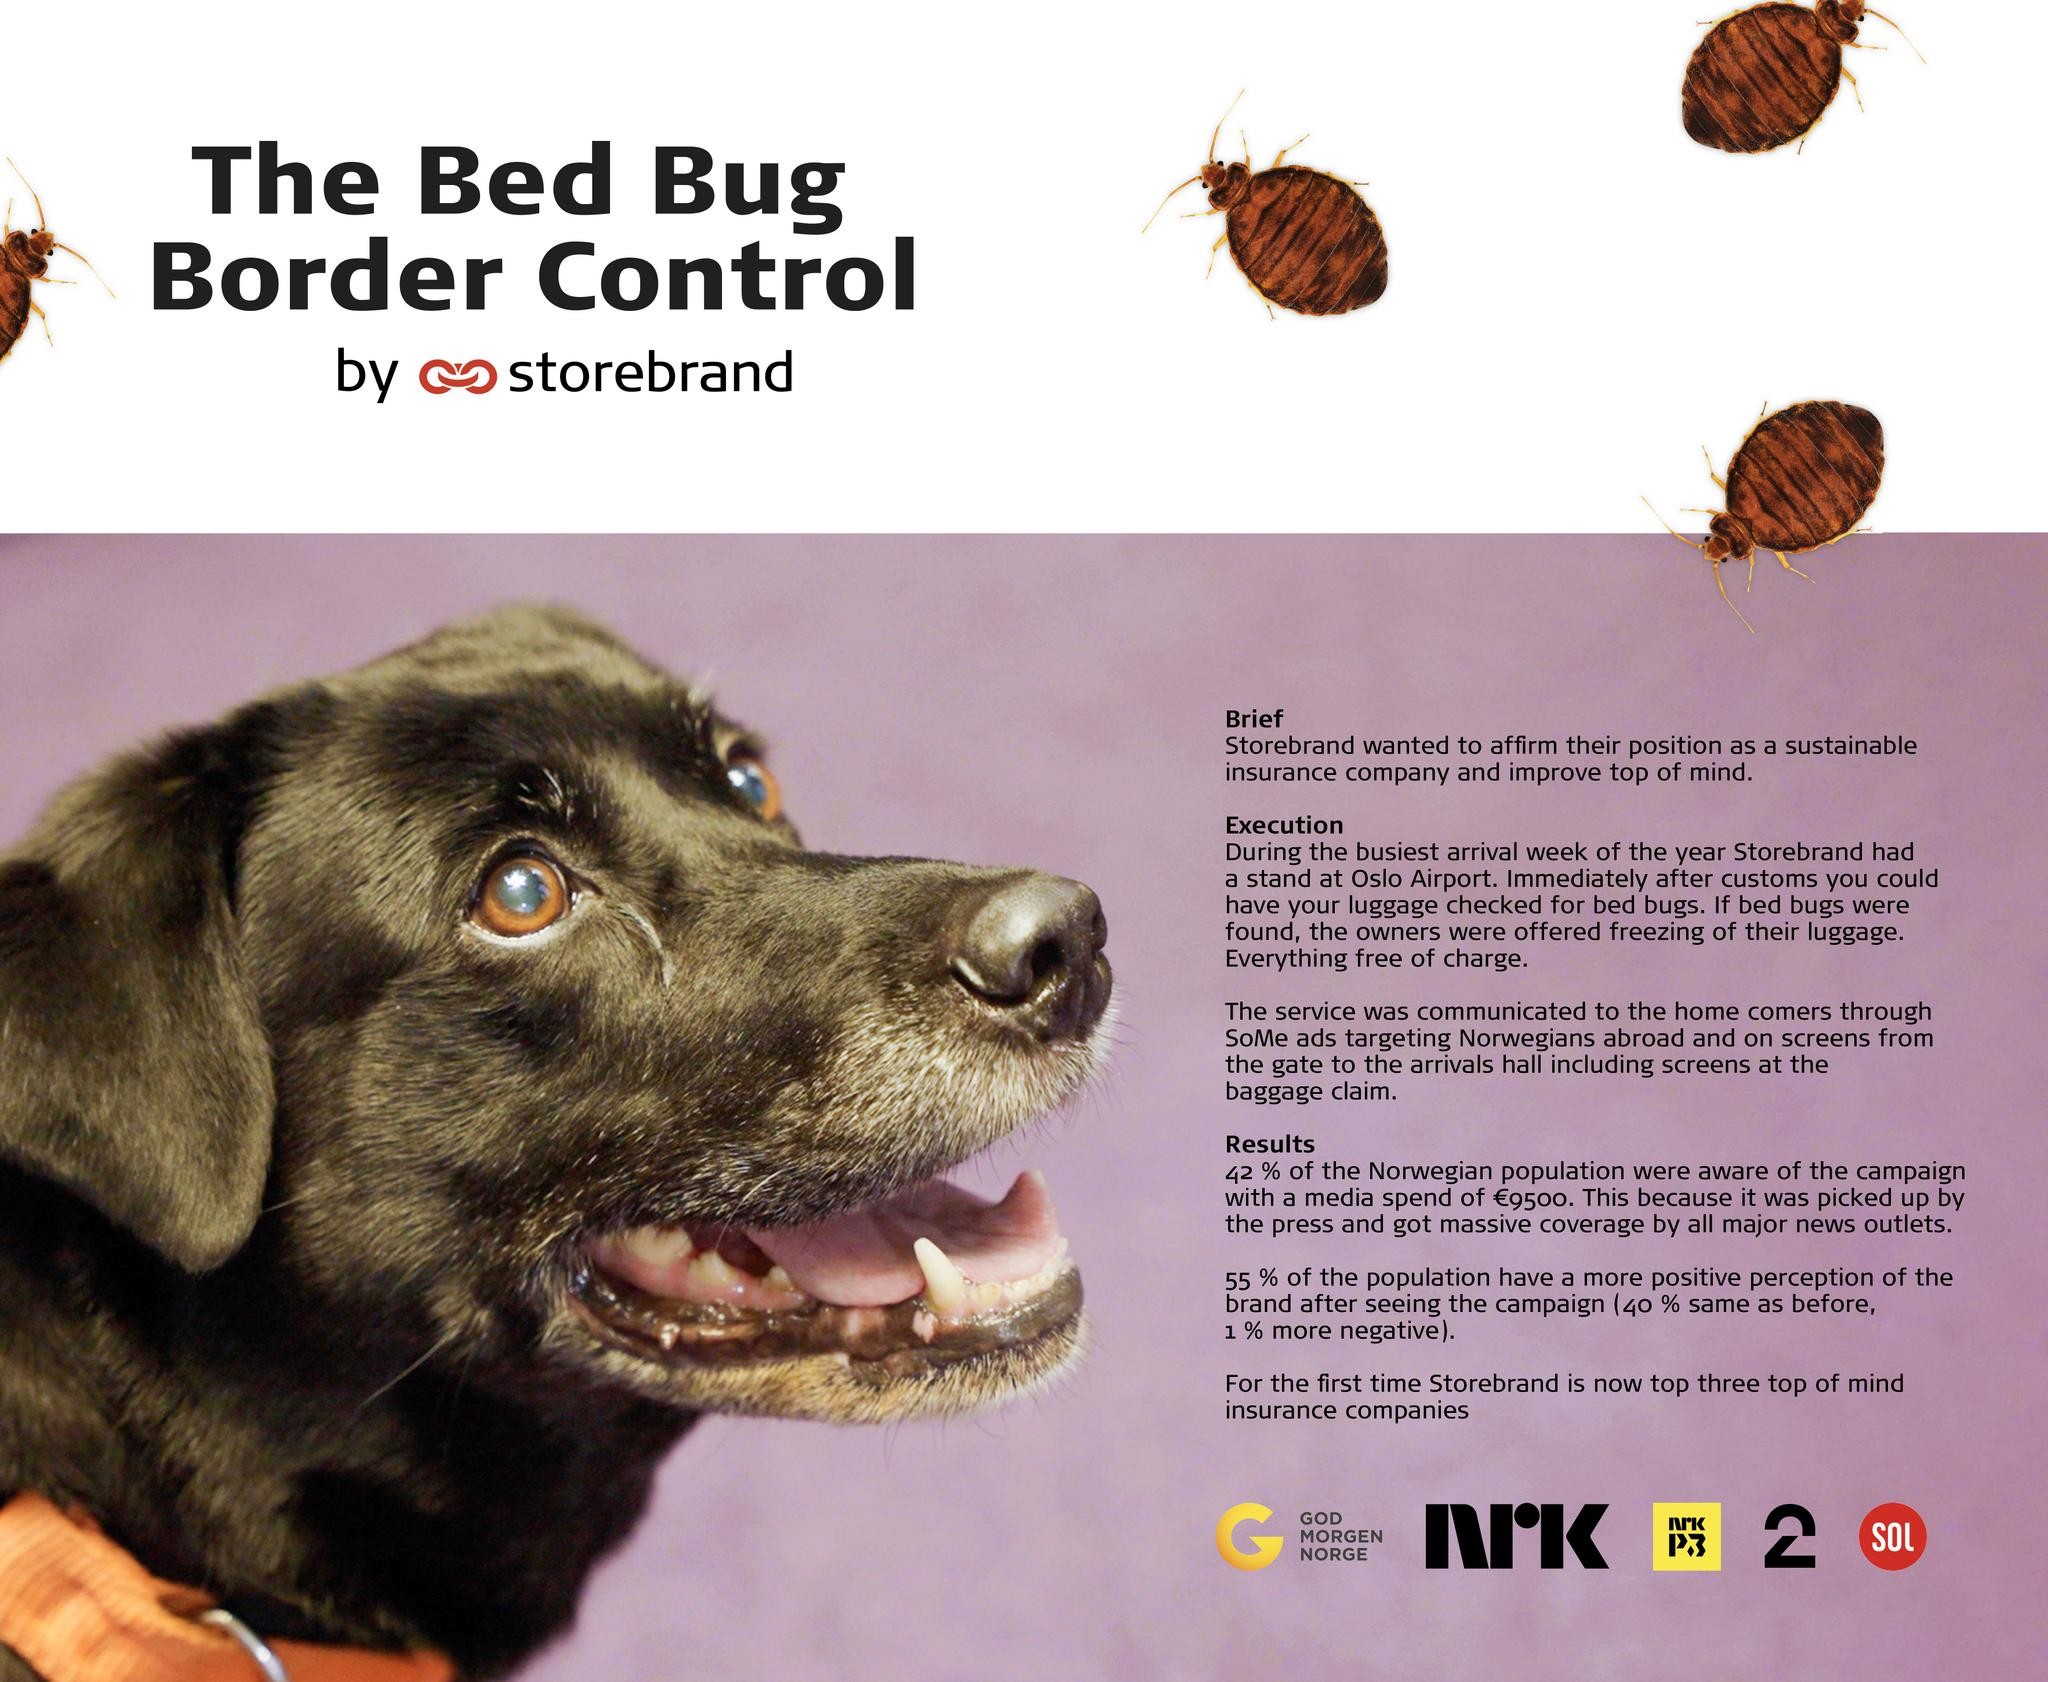 The Bed Bug Border Control